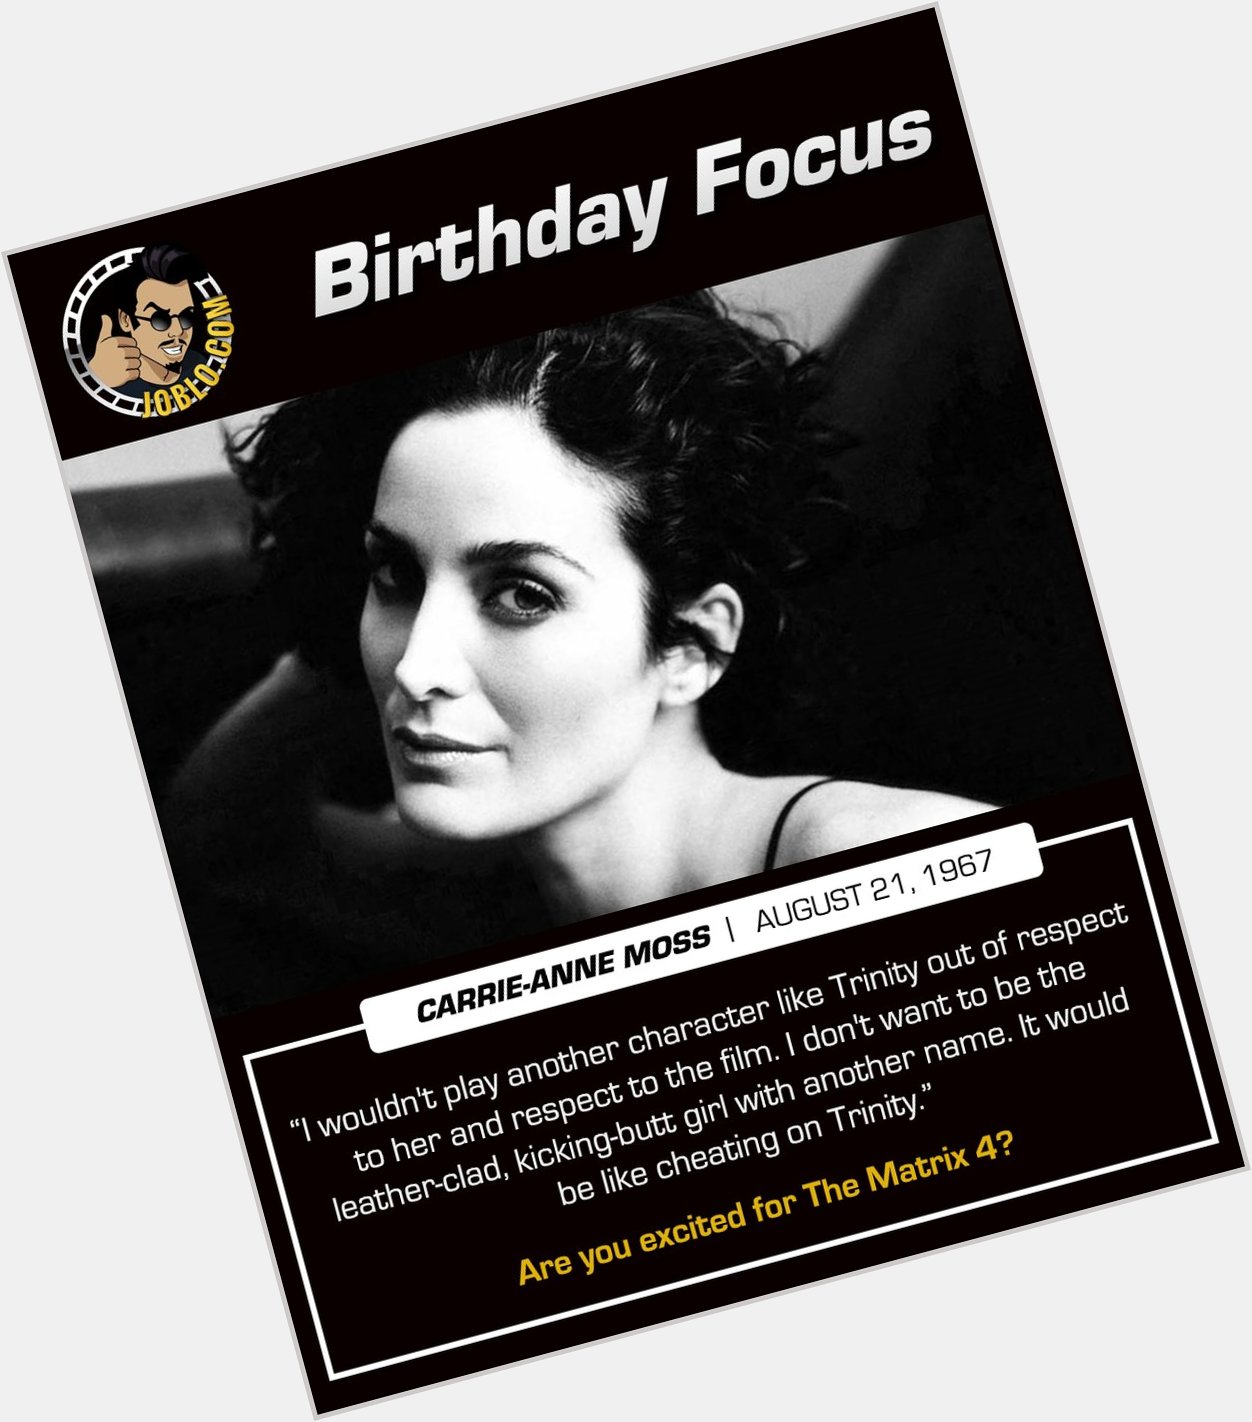 Happy 53rd birthday to The Matrix star, Carrie-Anne Moss!

Are you excited to see The Matrix 4? 